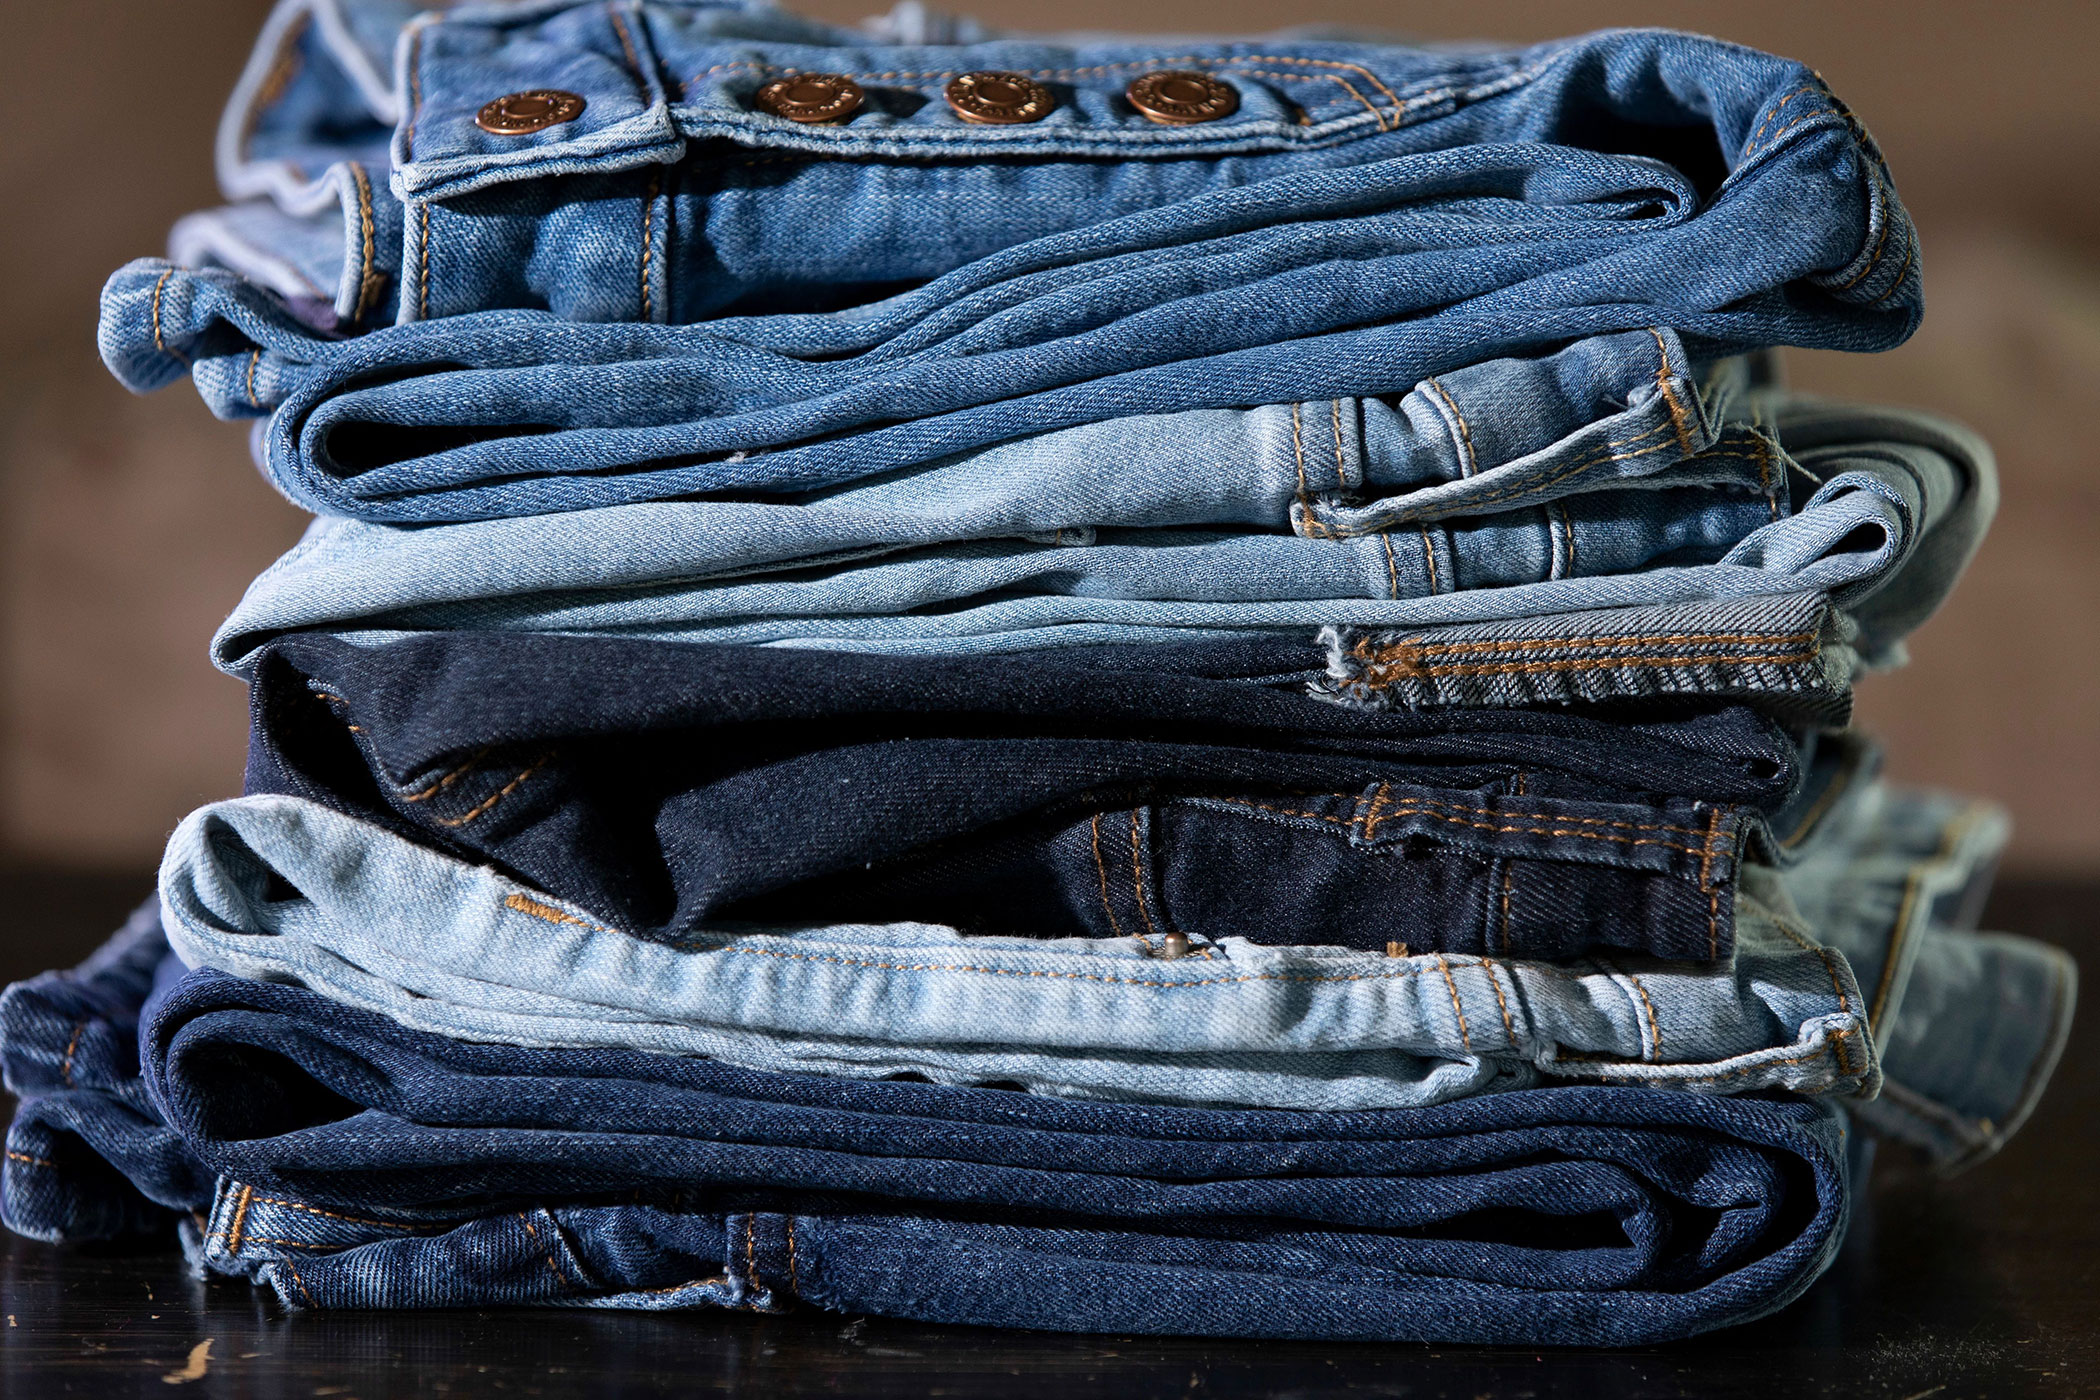 Scientists find eco-friendly way to dye blue jeans